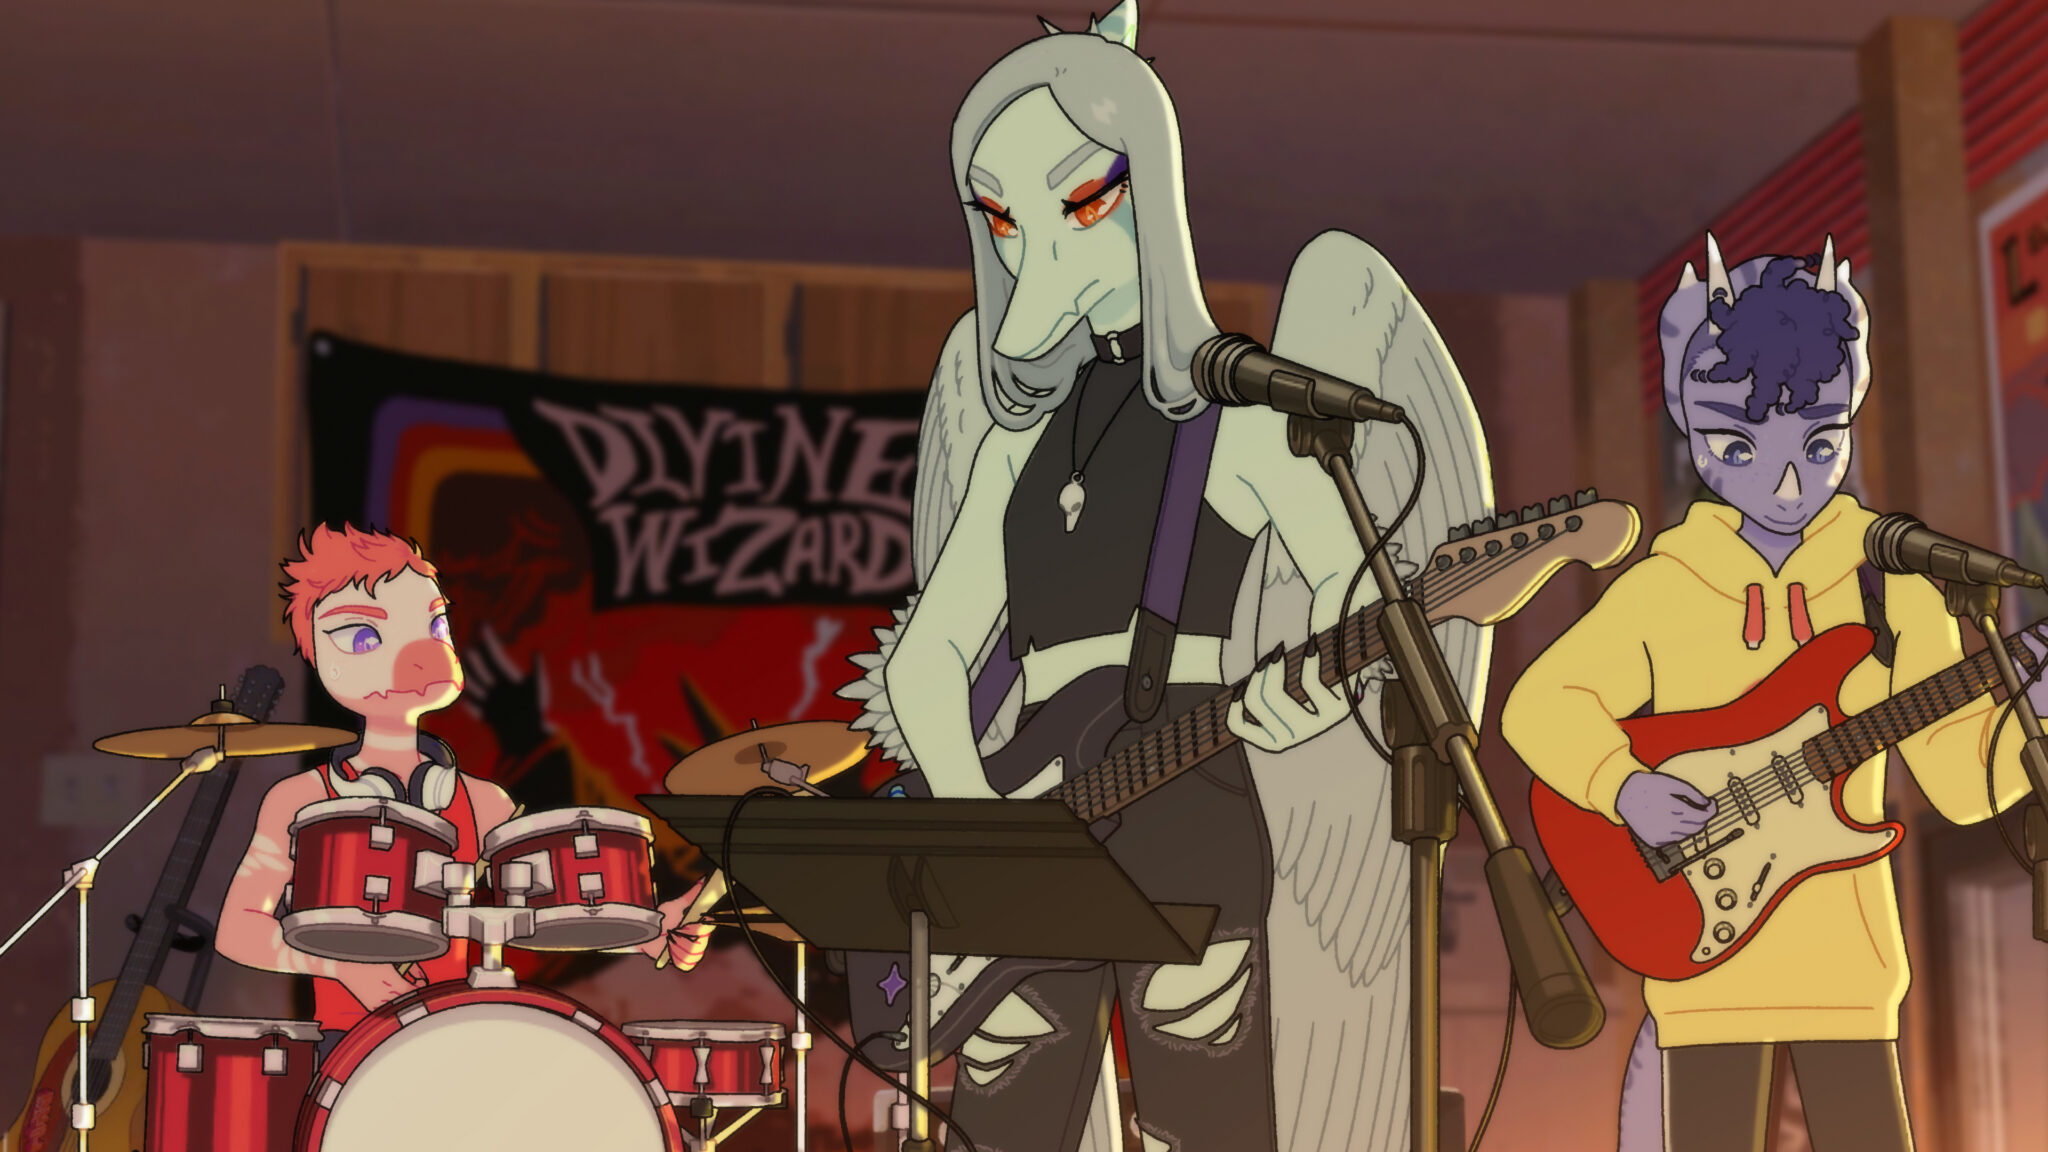 Goodbye Volcano High screenshot of Worm Drama band. From left to right: Reed on drums, Fang on guitar and vocals, Trish on guitar